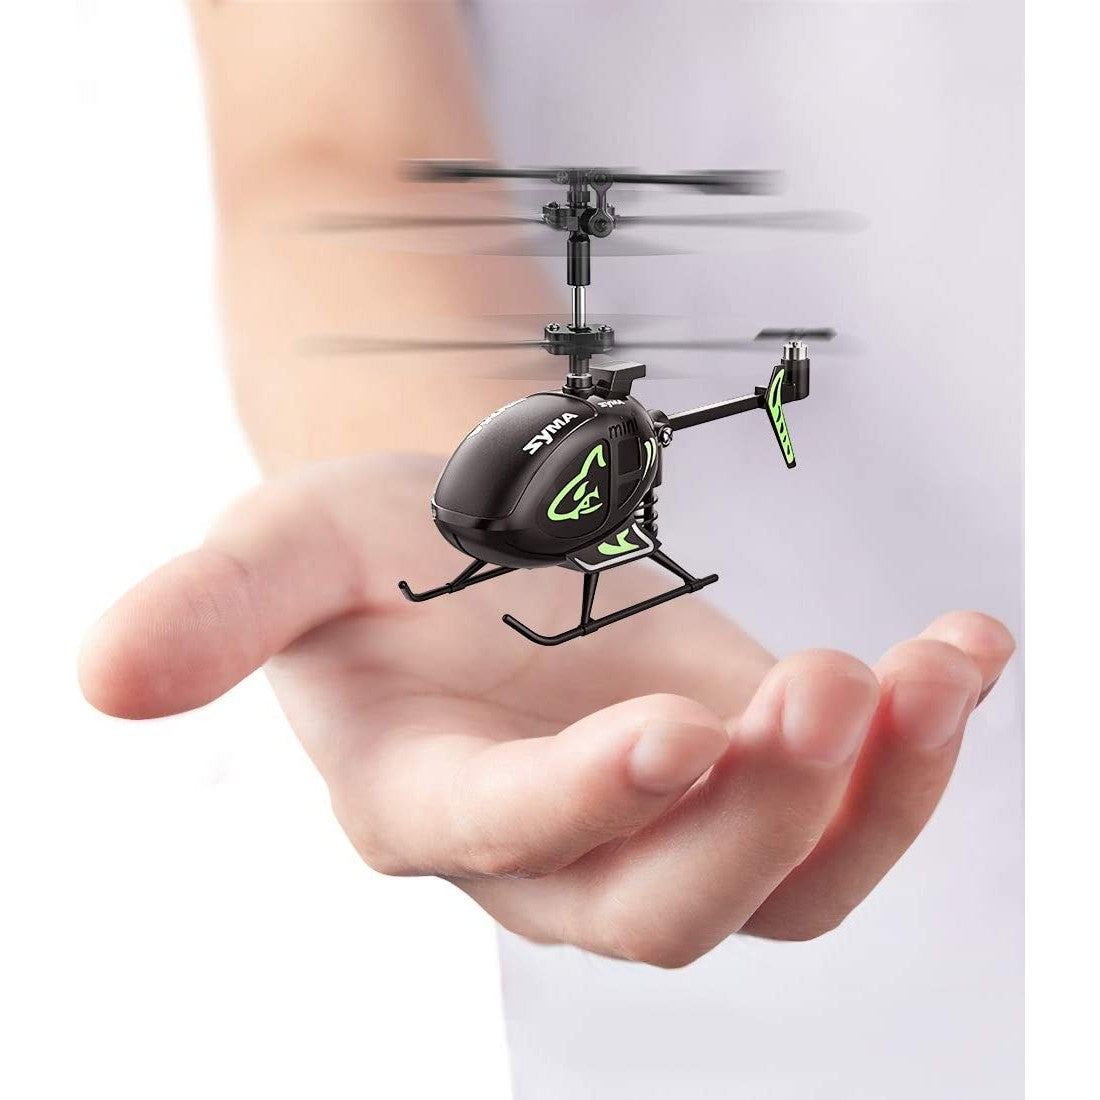 A mini RC helicopter is about to land in the palm of a persons hand.